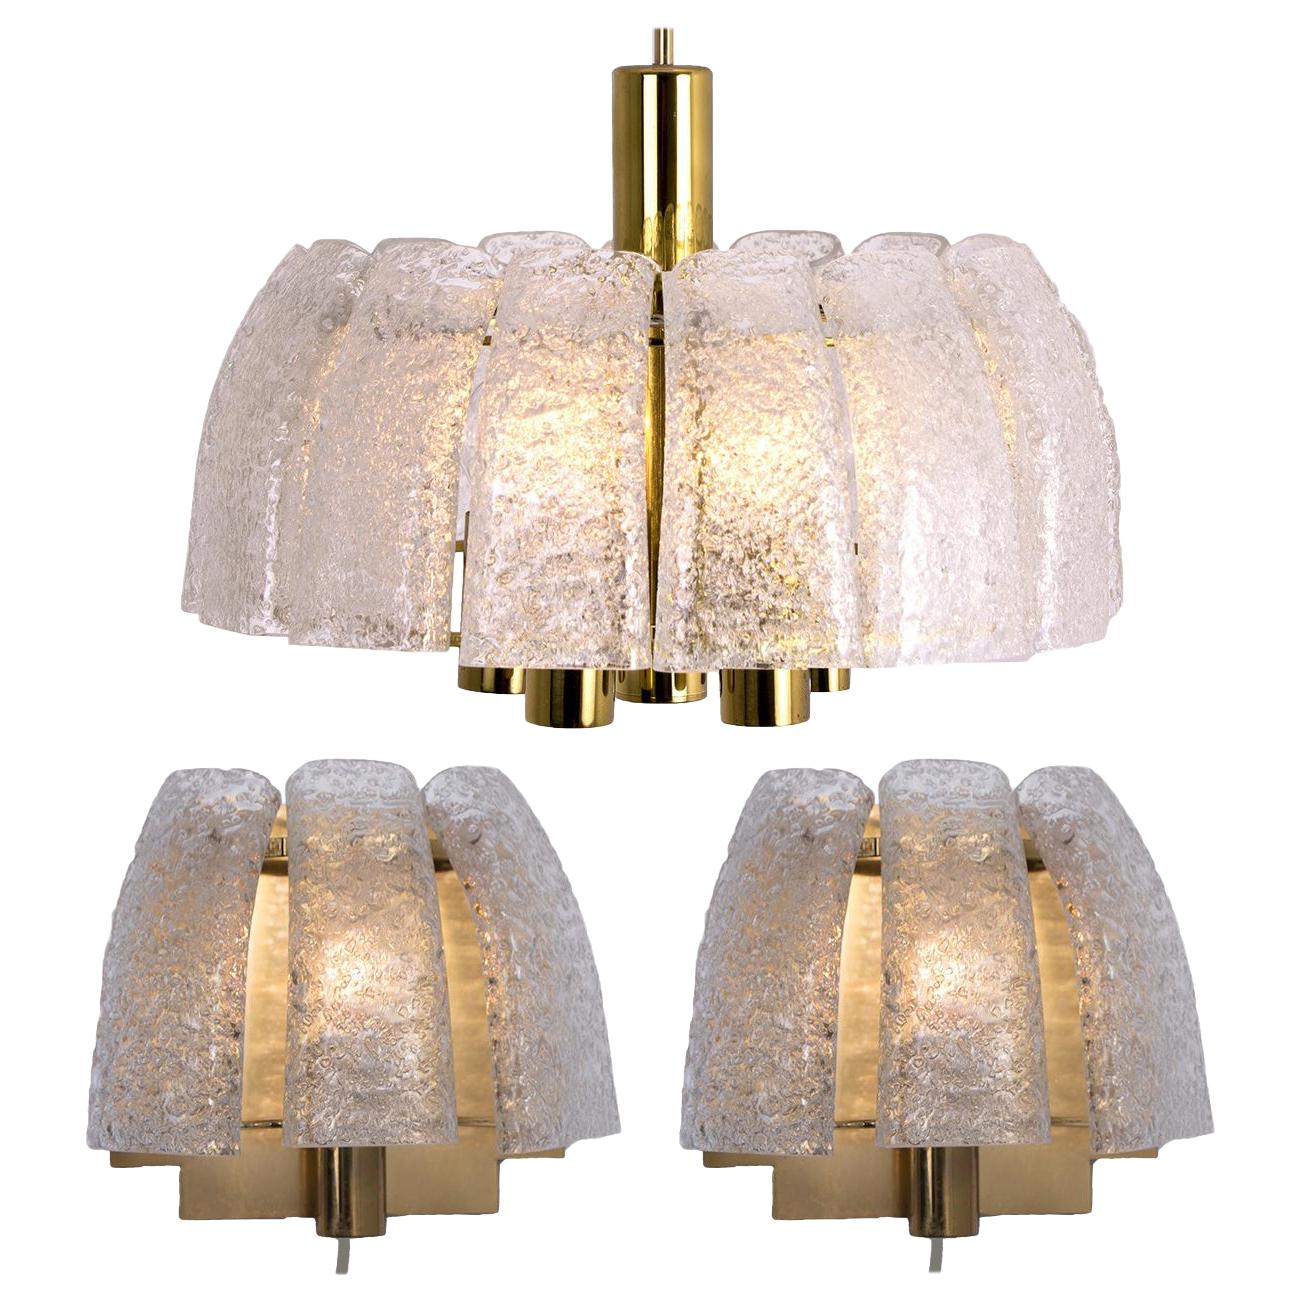 Doria Light Fixtures, One Chandelier and Two Wall Sconces